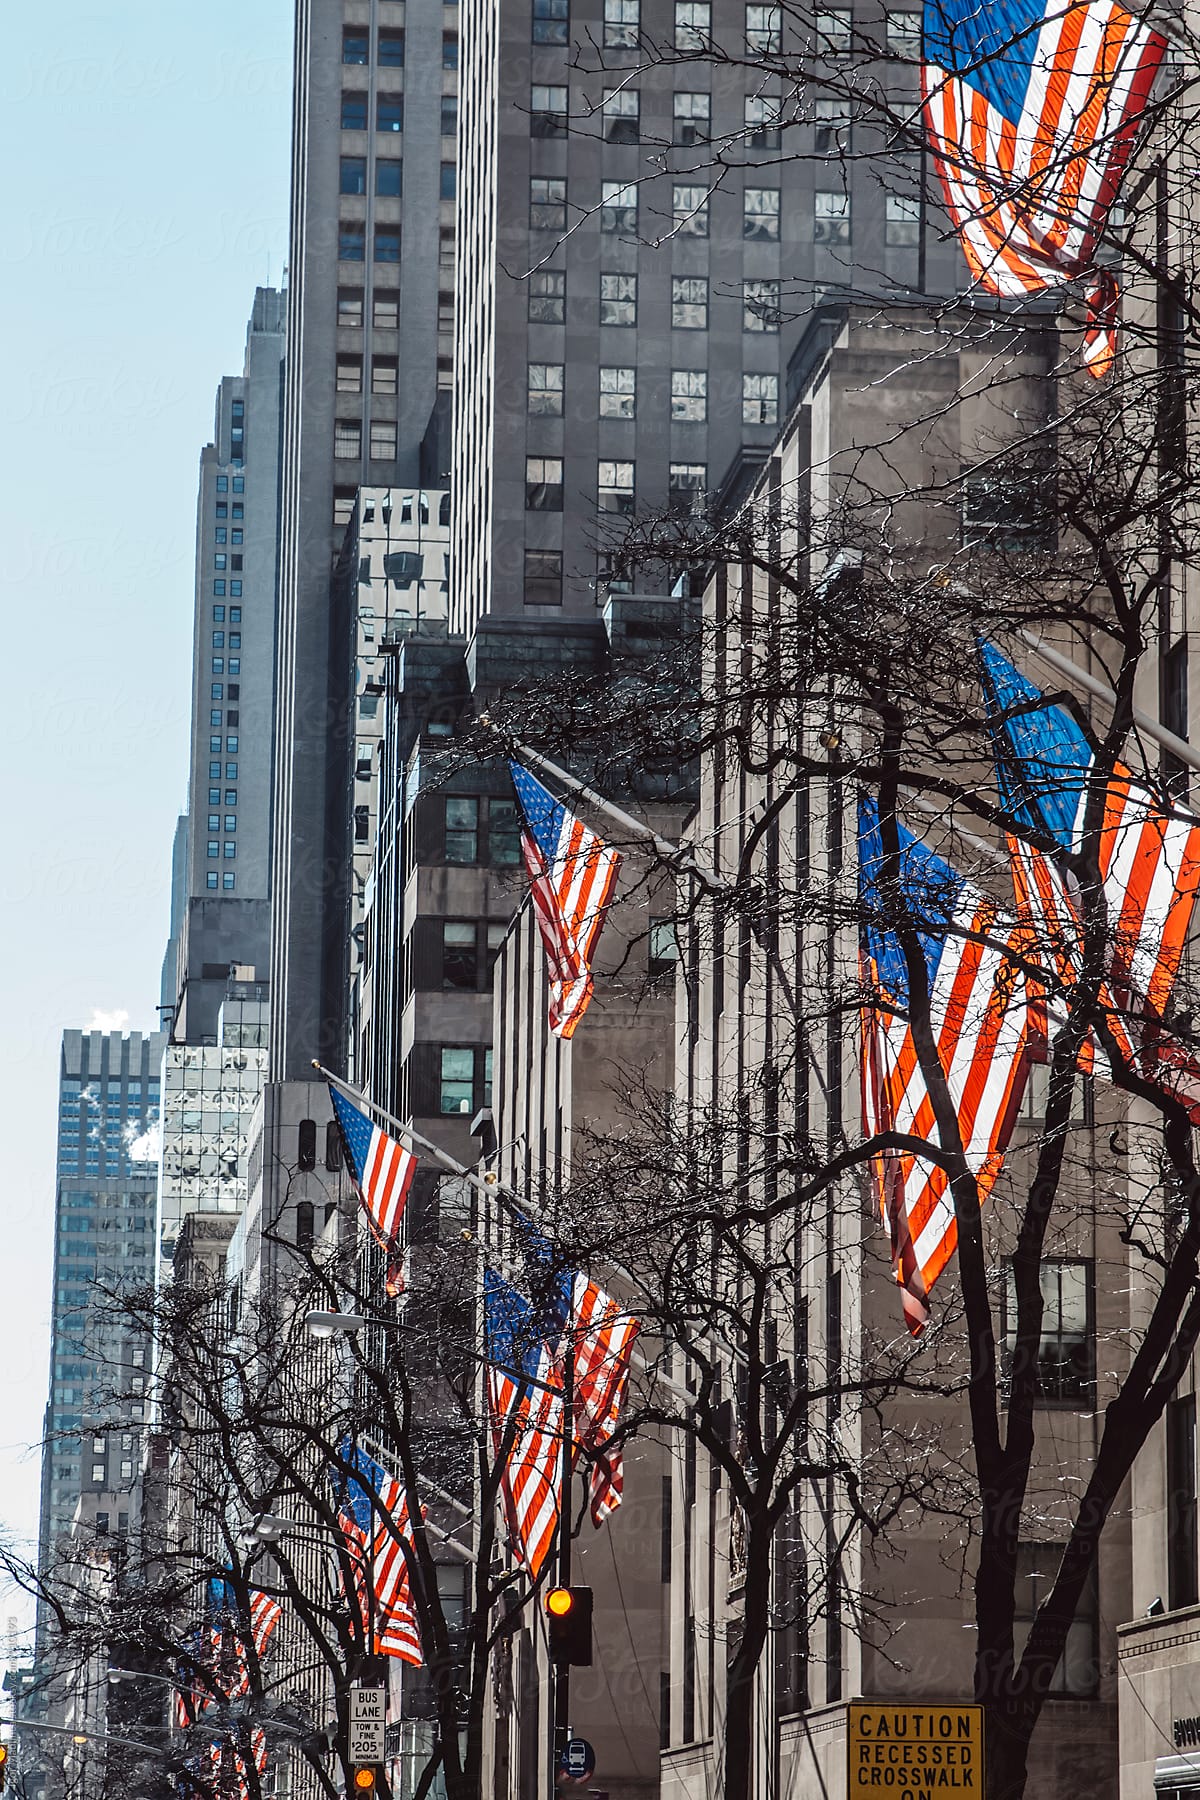 New York streets, the American flags, freedom